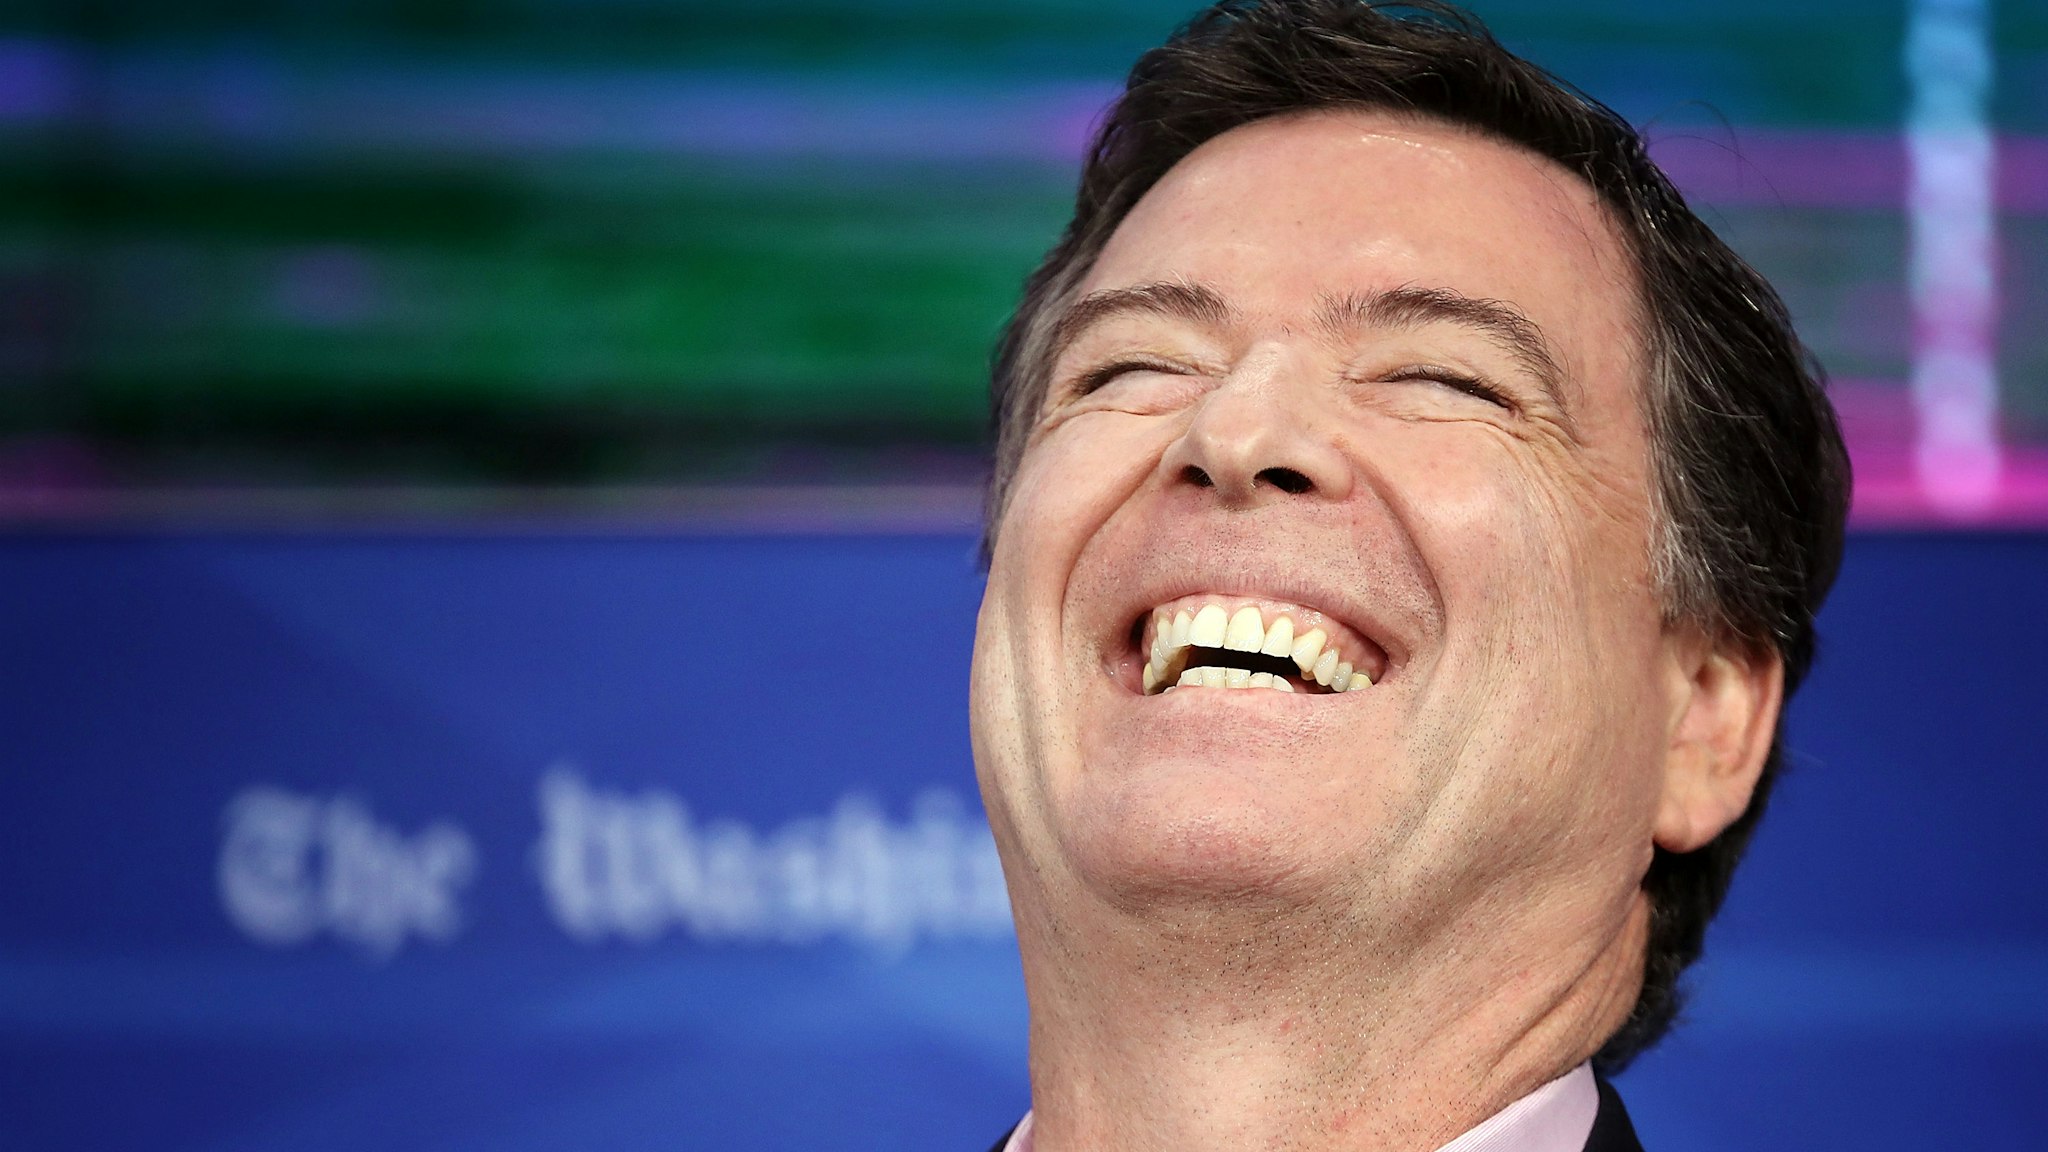 WASHINGTON, DC - MAY 07: Former FBI director James Comey laughs while answering questions during an interview forum at the Washington Post May 8, 2018 in Washington, DC. Comey discussed his stormy tenure as head of the FBI, his handling of the Hillary Clinton email investigation, his tense relationship with President Trump and his controversial firing a year ago, during the forum.